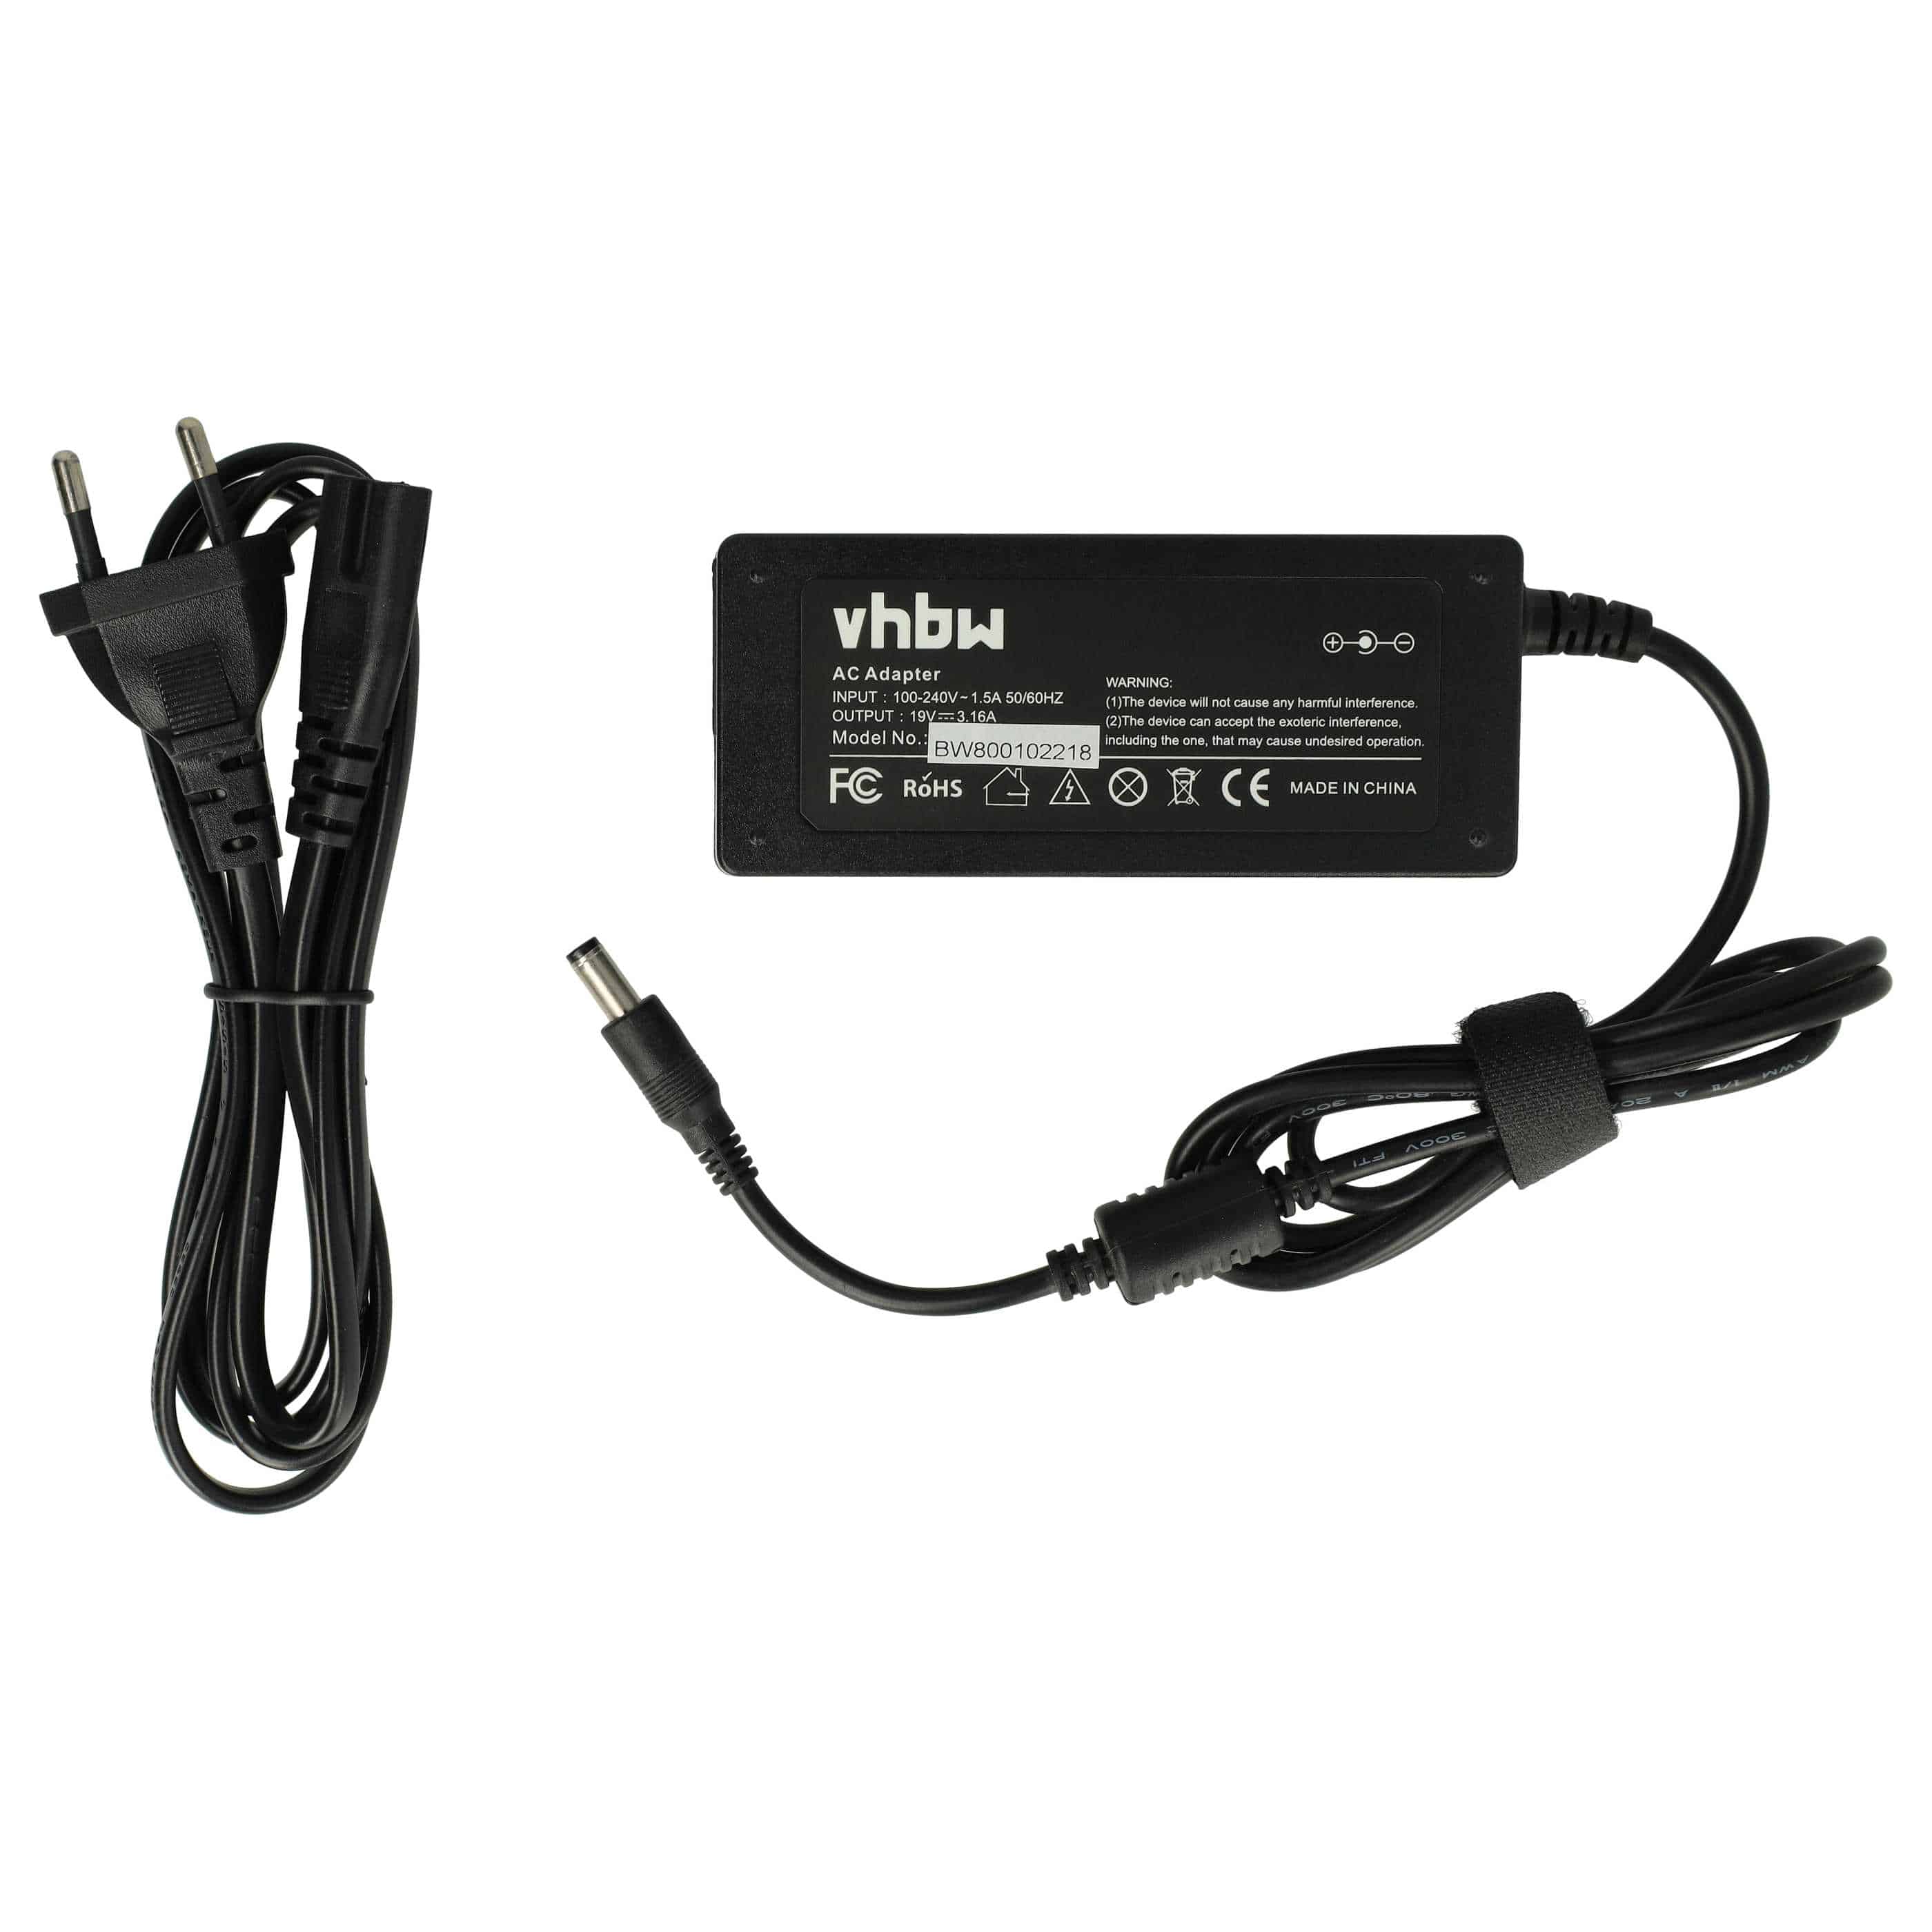 Mains Power Adapter replaces Dell 310-5422 for DellNotebook, 60 W